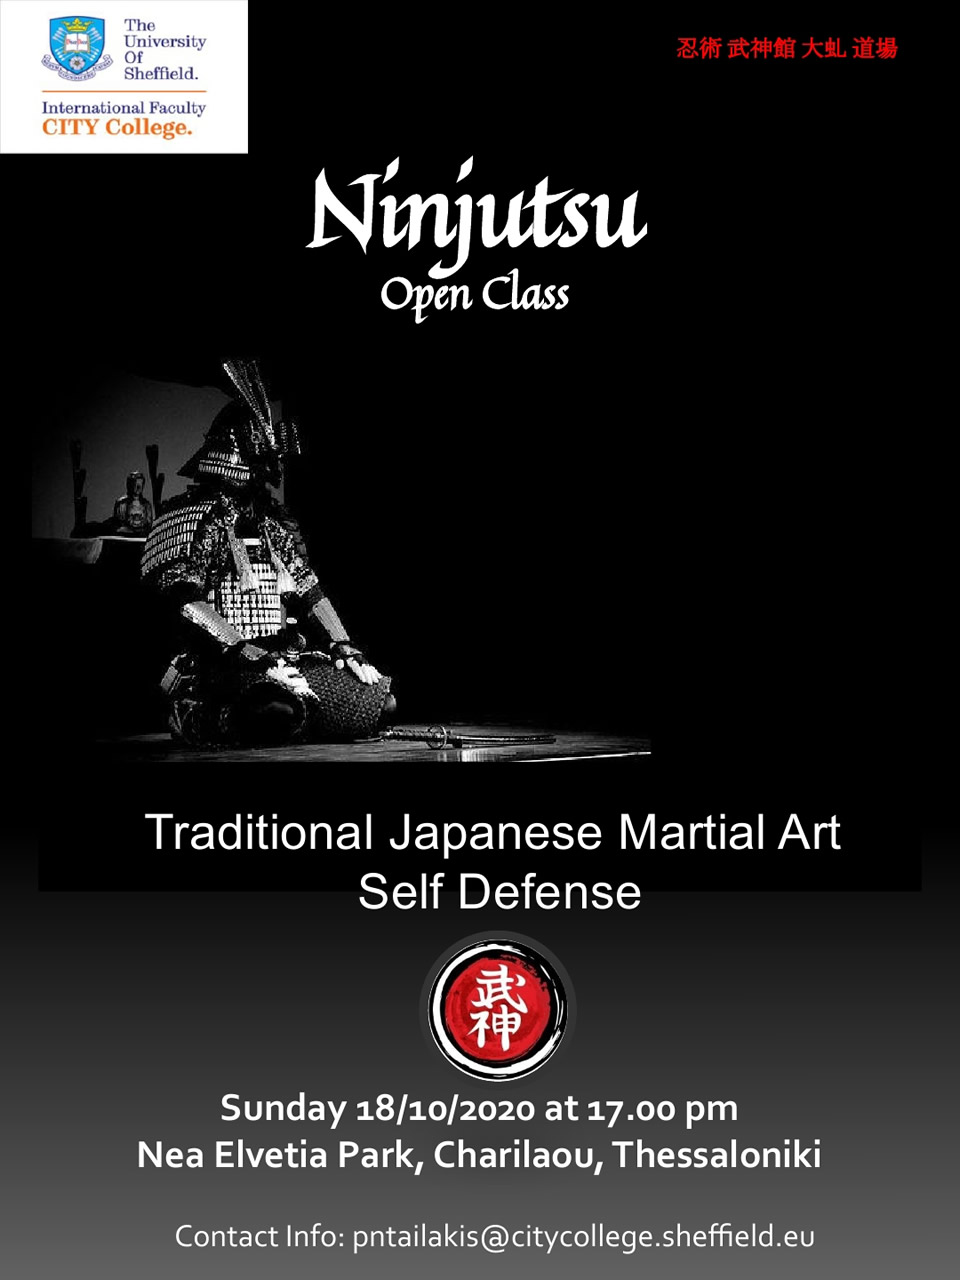 The Ninjutsu Club of CITY College is organising the 1st Open Class